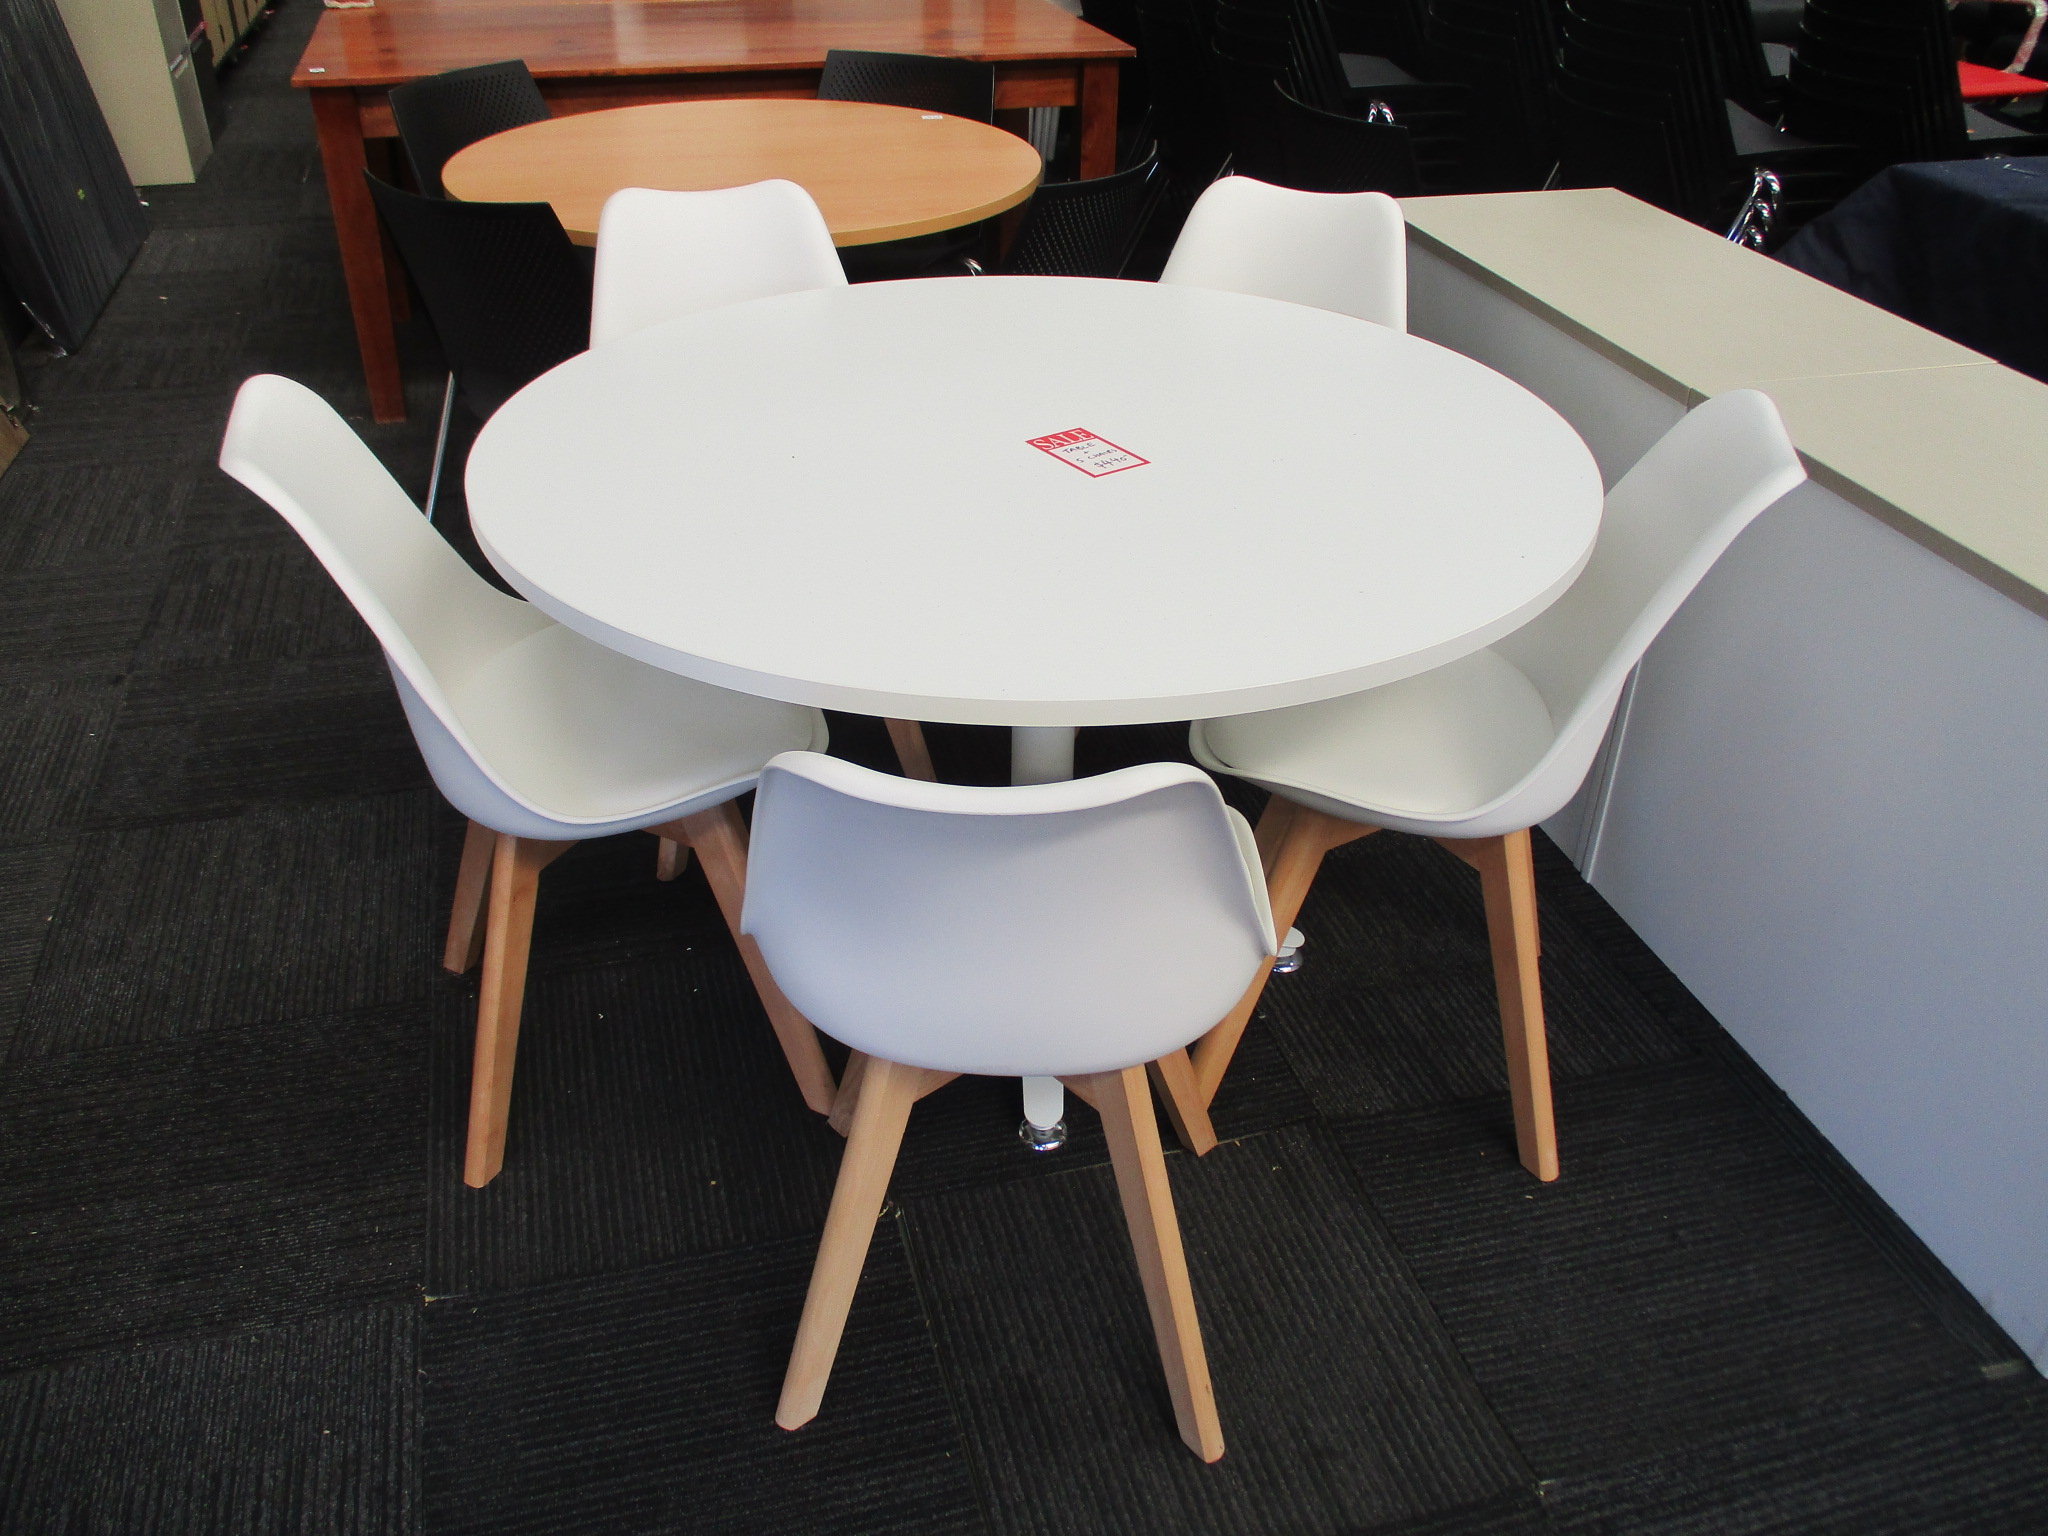 1200mm White Table with Chairs $440